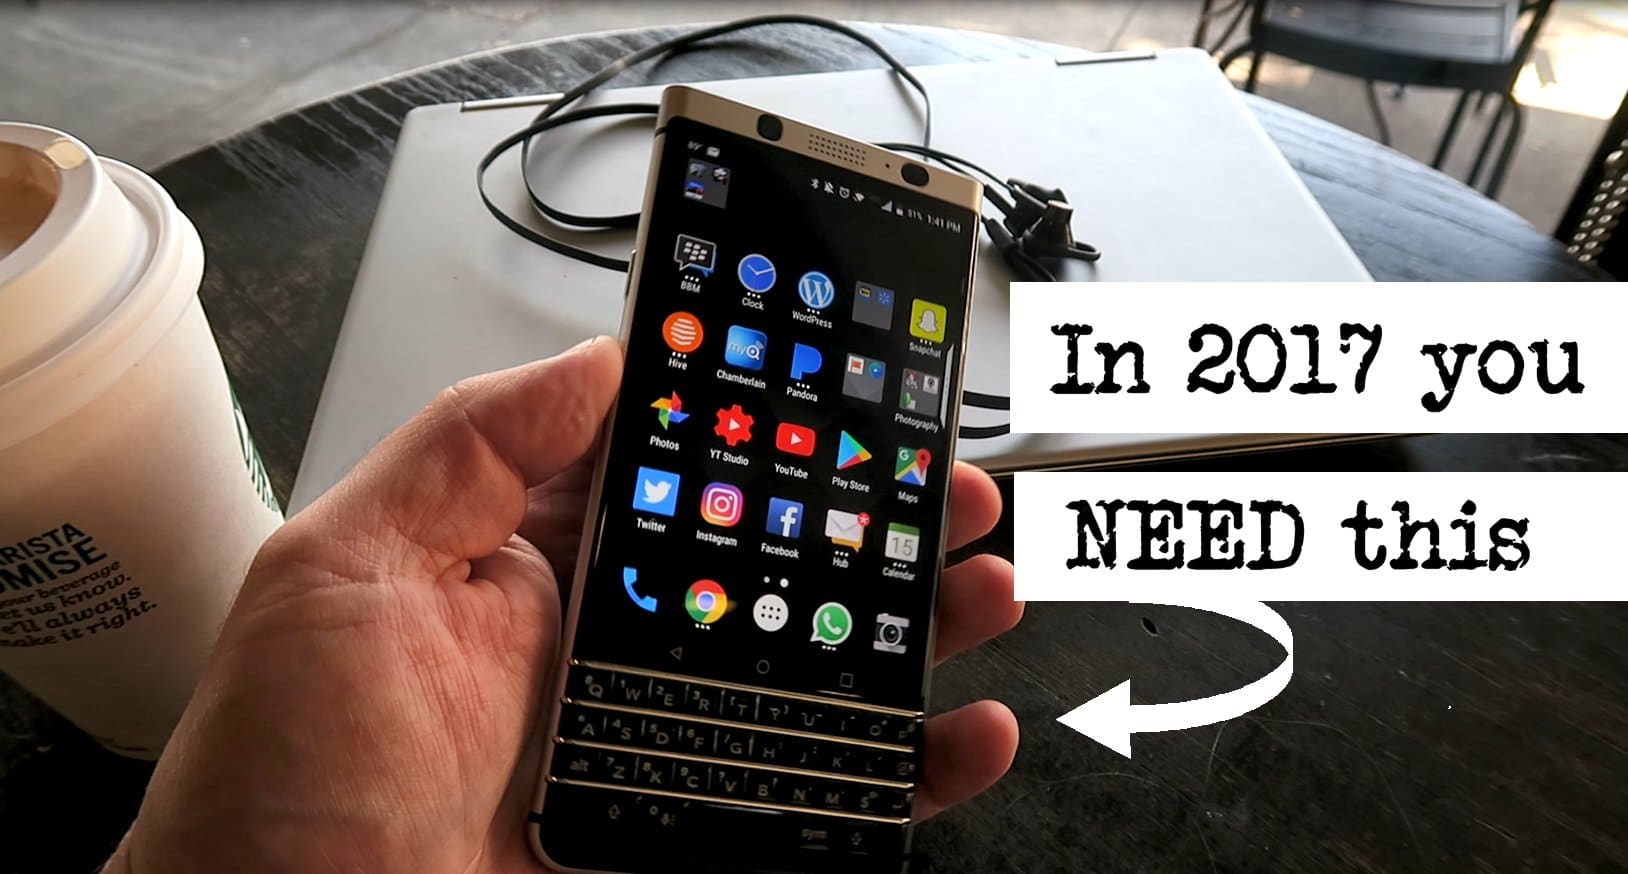 The power of the KEYone makes it an absolute winner